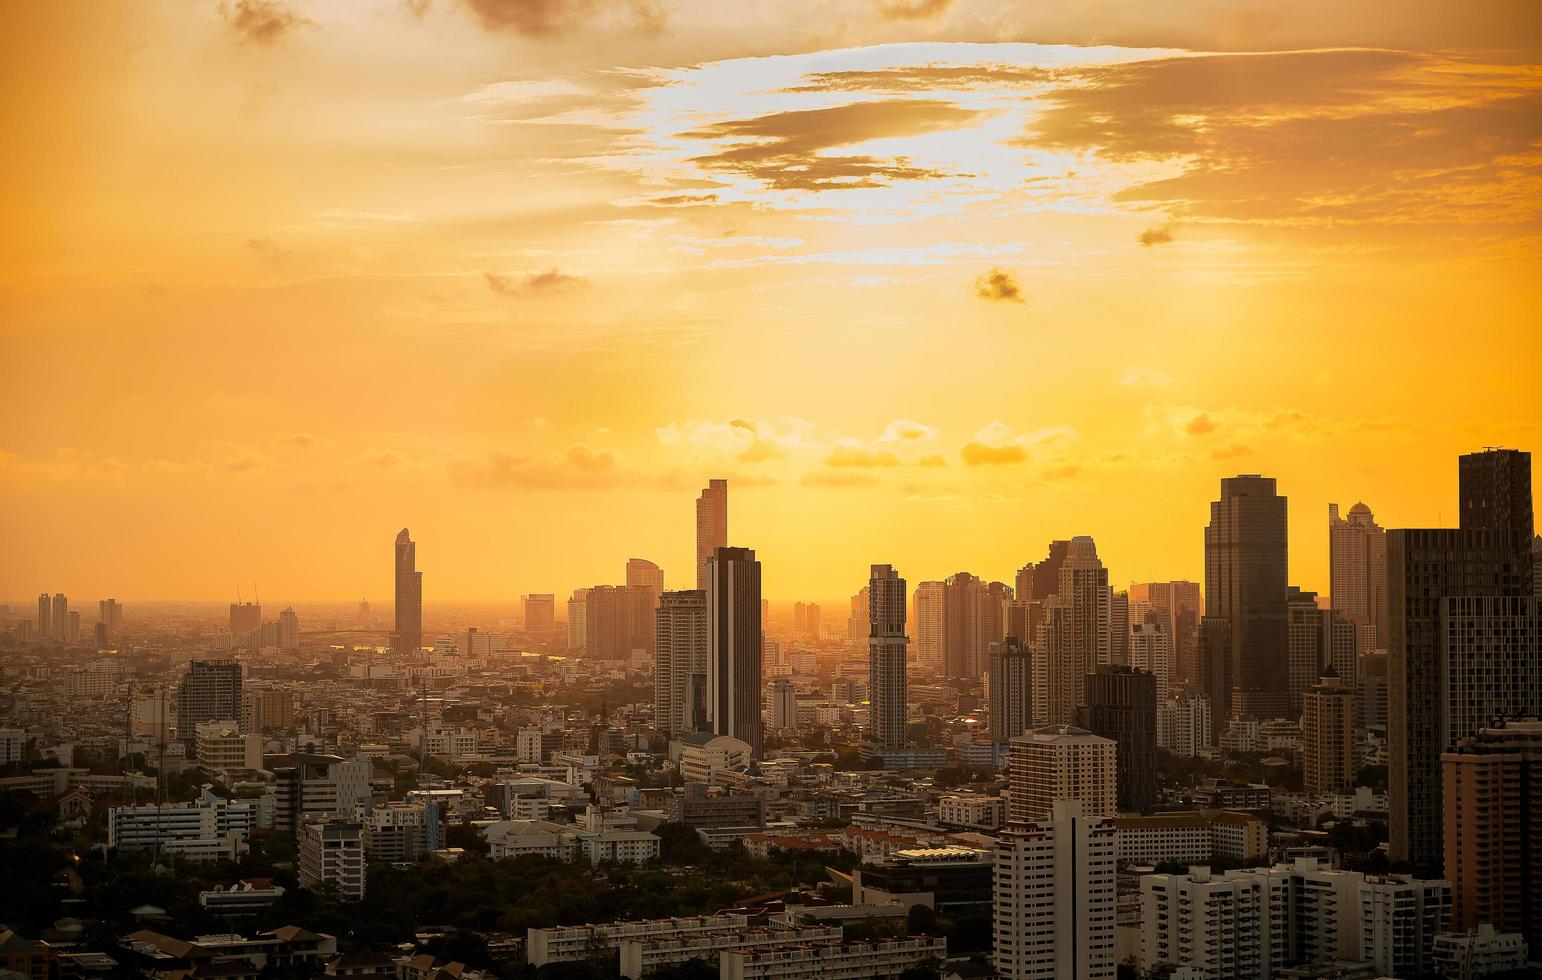 View of a high-rise building in Bangkok When the sun is about to set and when Thailand is covered by smog from PM2.5 dust photo